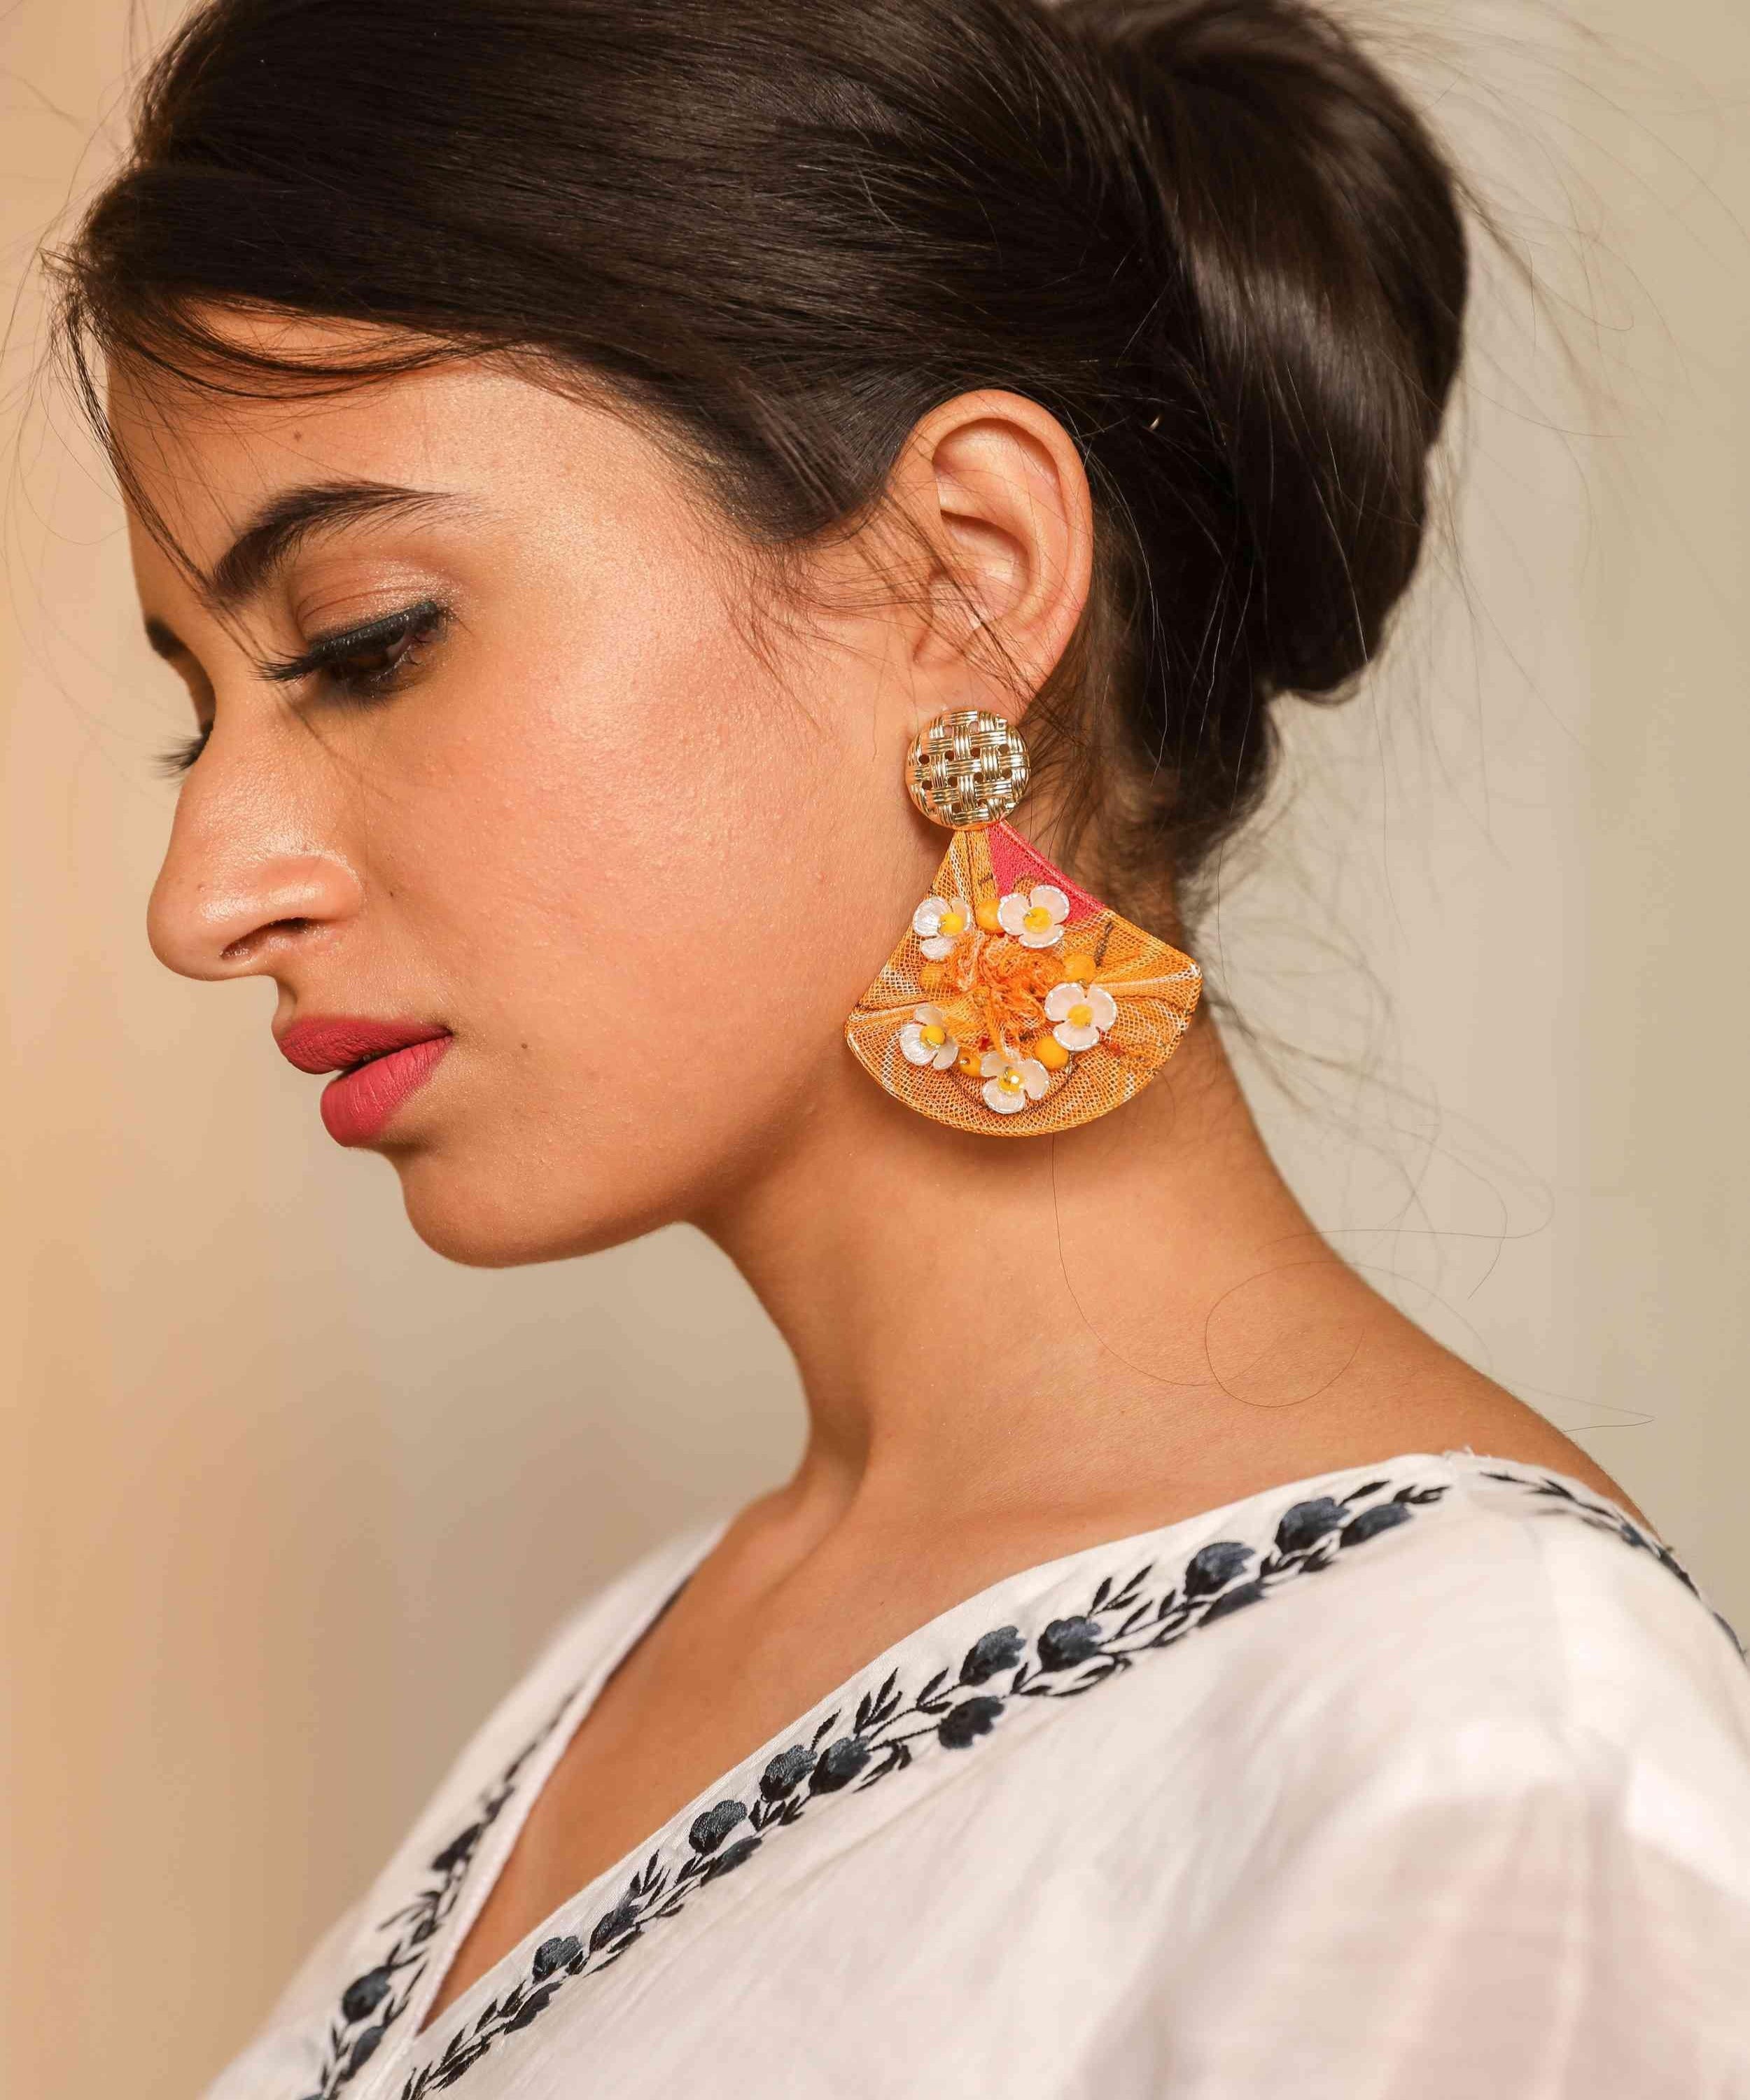 Buy Indian Petals Satin Thread work Stylish Fancy Fashion Round Dangler  Earrings with Drops for Girls Women Artificial Fashion Dangler Earrings  Grey  Lowest price in India GlowRoad